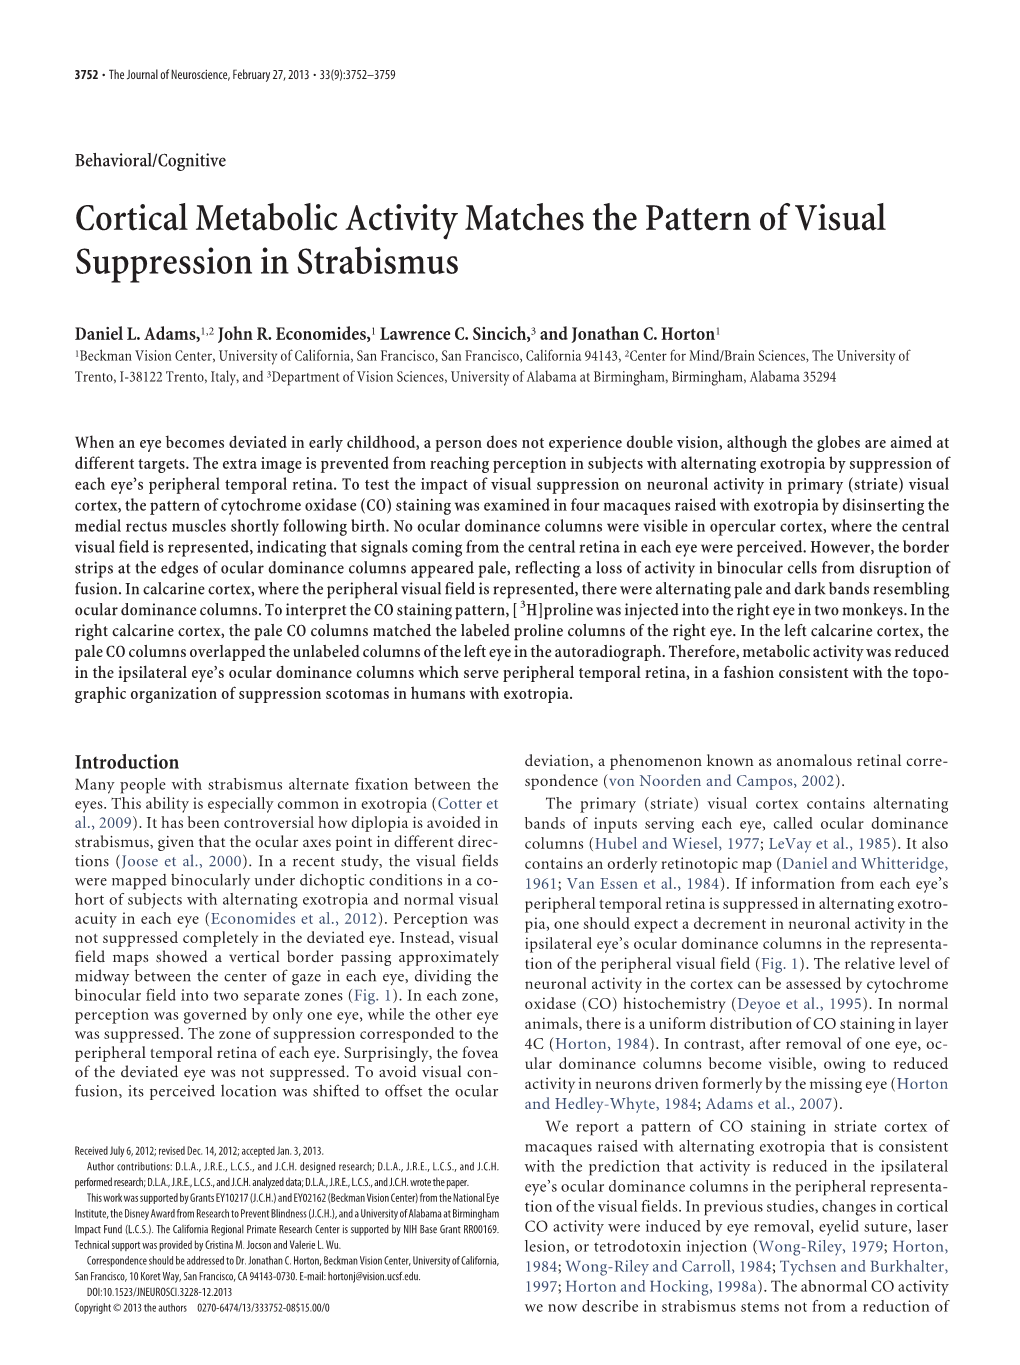 Cortical Metabolic Activity Matches the Pattern of Visual Suppression in Strabismus